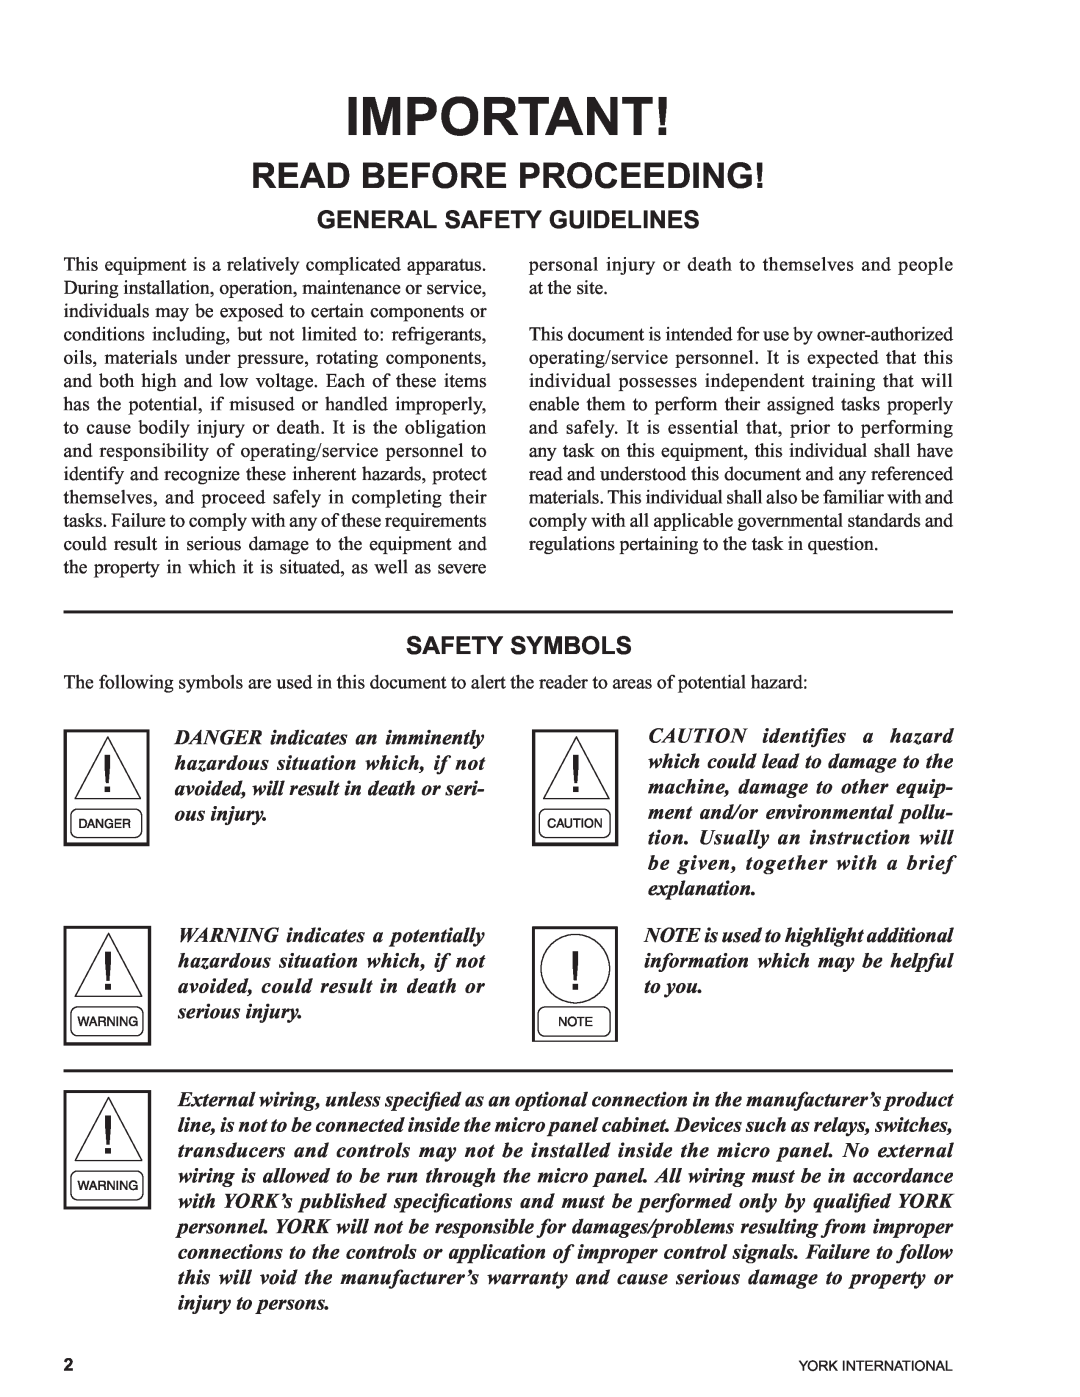 York 00497VIP manual General Safety Guidelines, Safety Symbols, Read Before Proceeding 